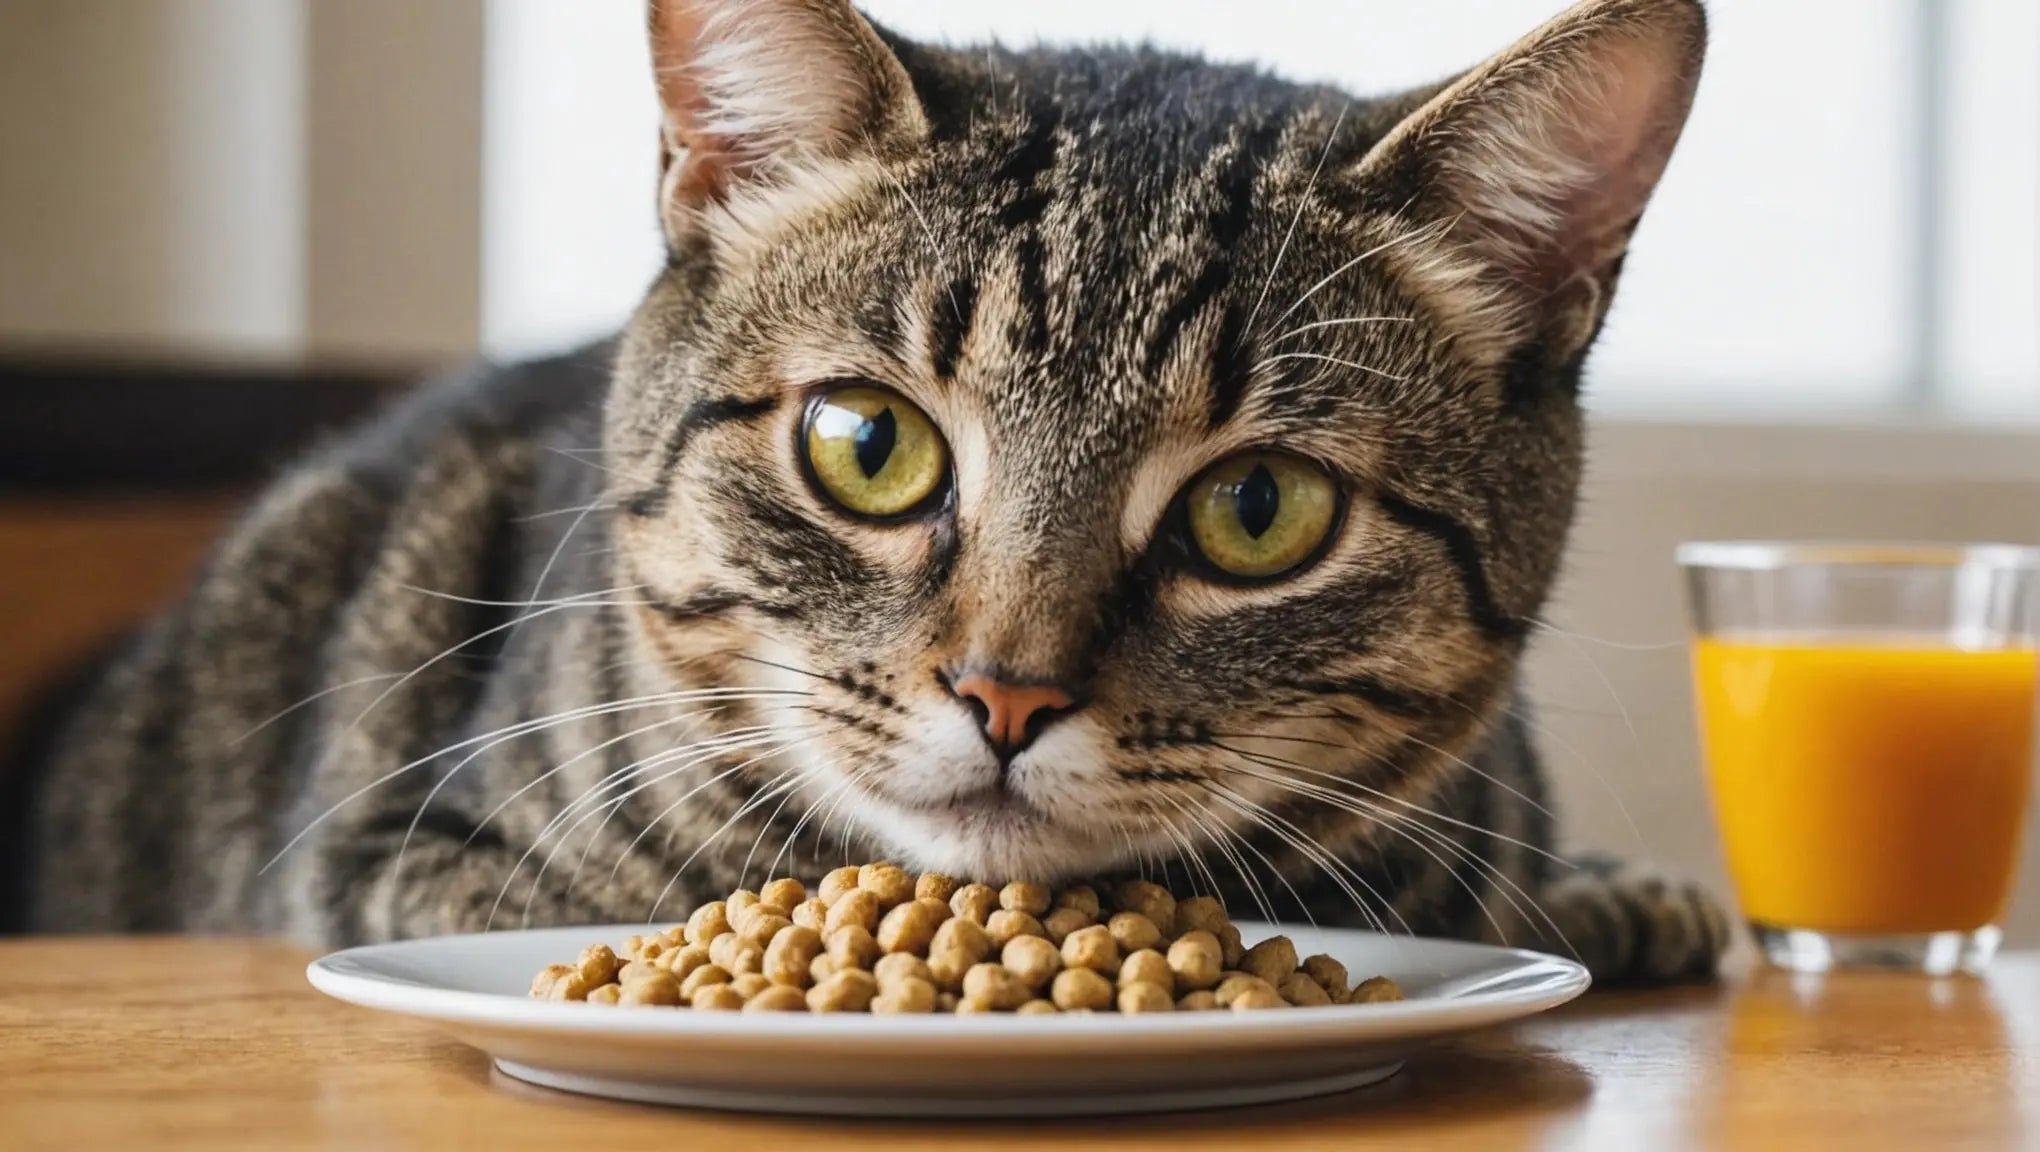 Top 5 Cat Food Brands for a Happy and Healthy Feline